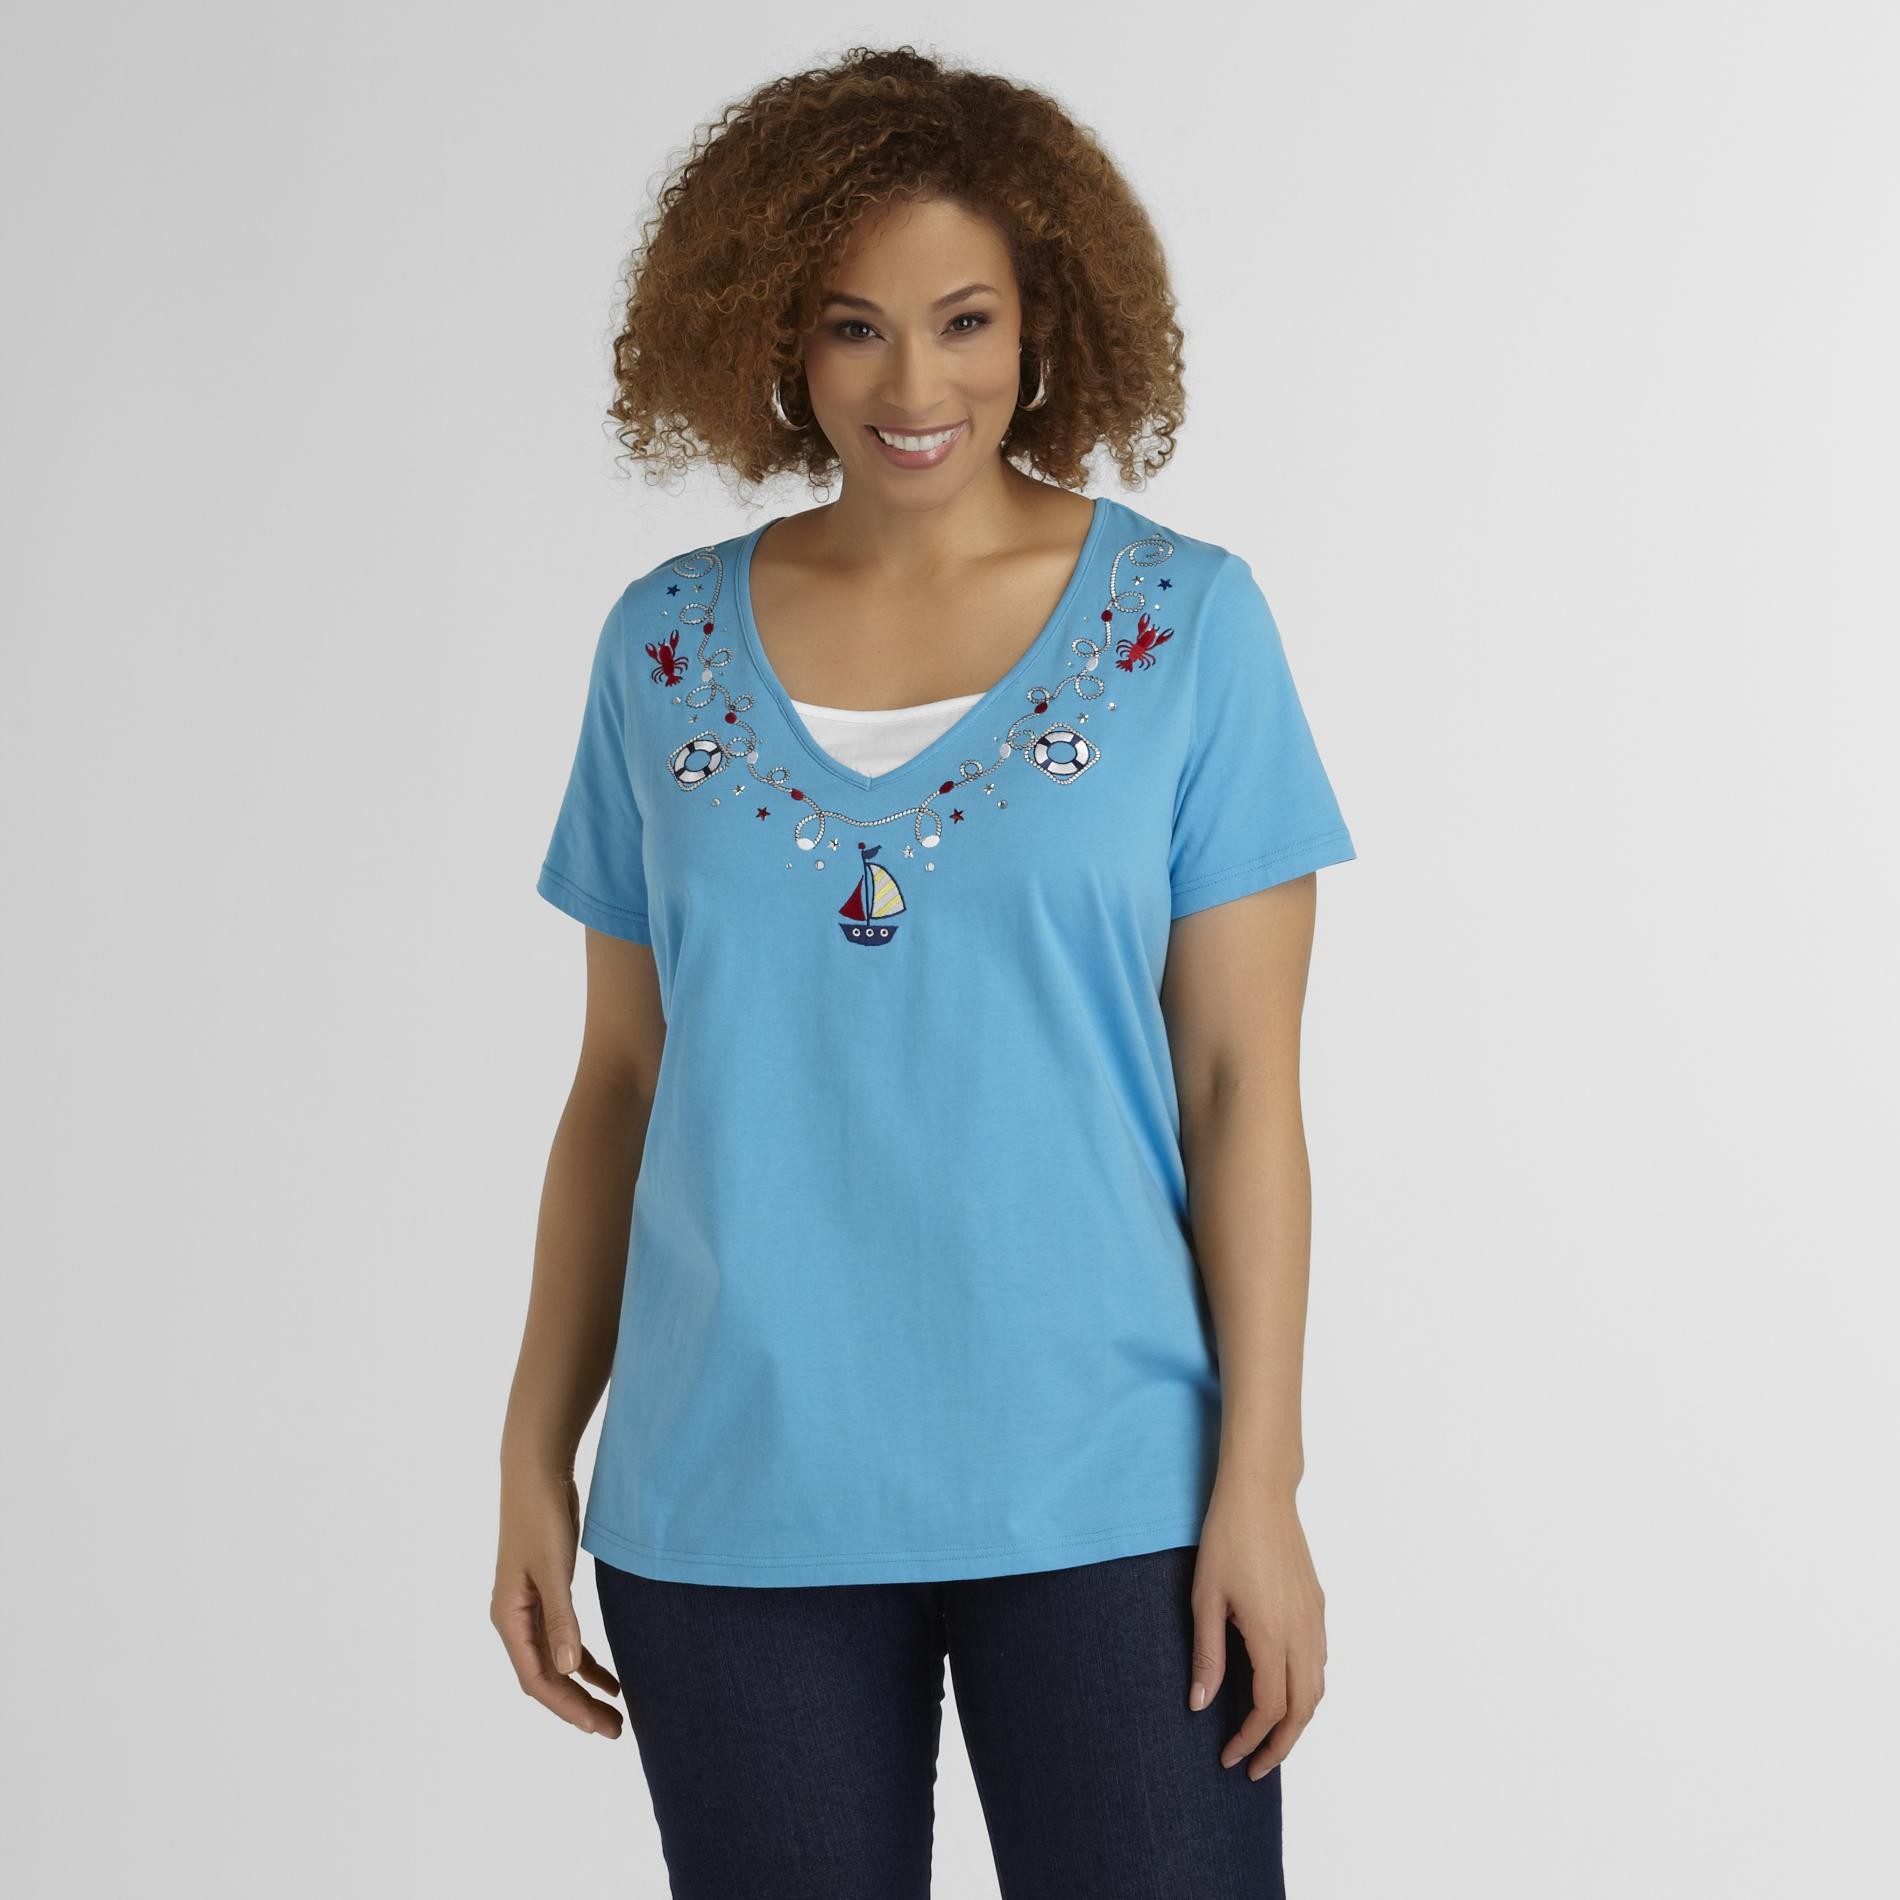 Basic Editions Women's Plus Embroidered T-Shirt - Nautical